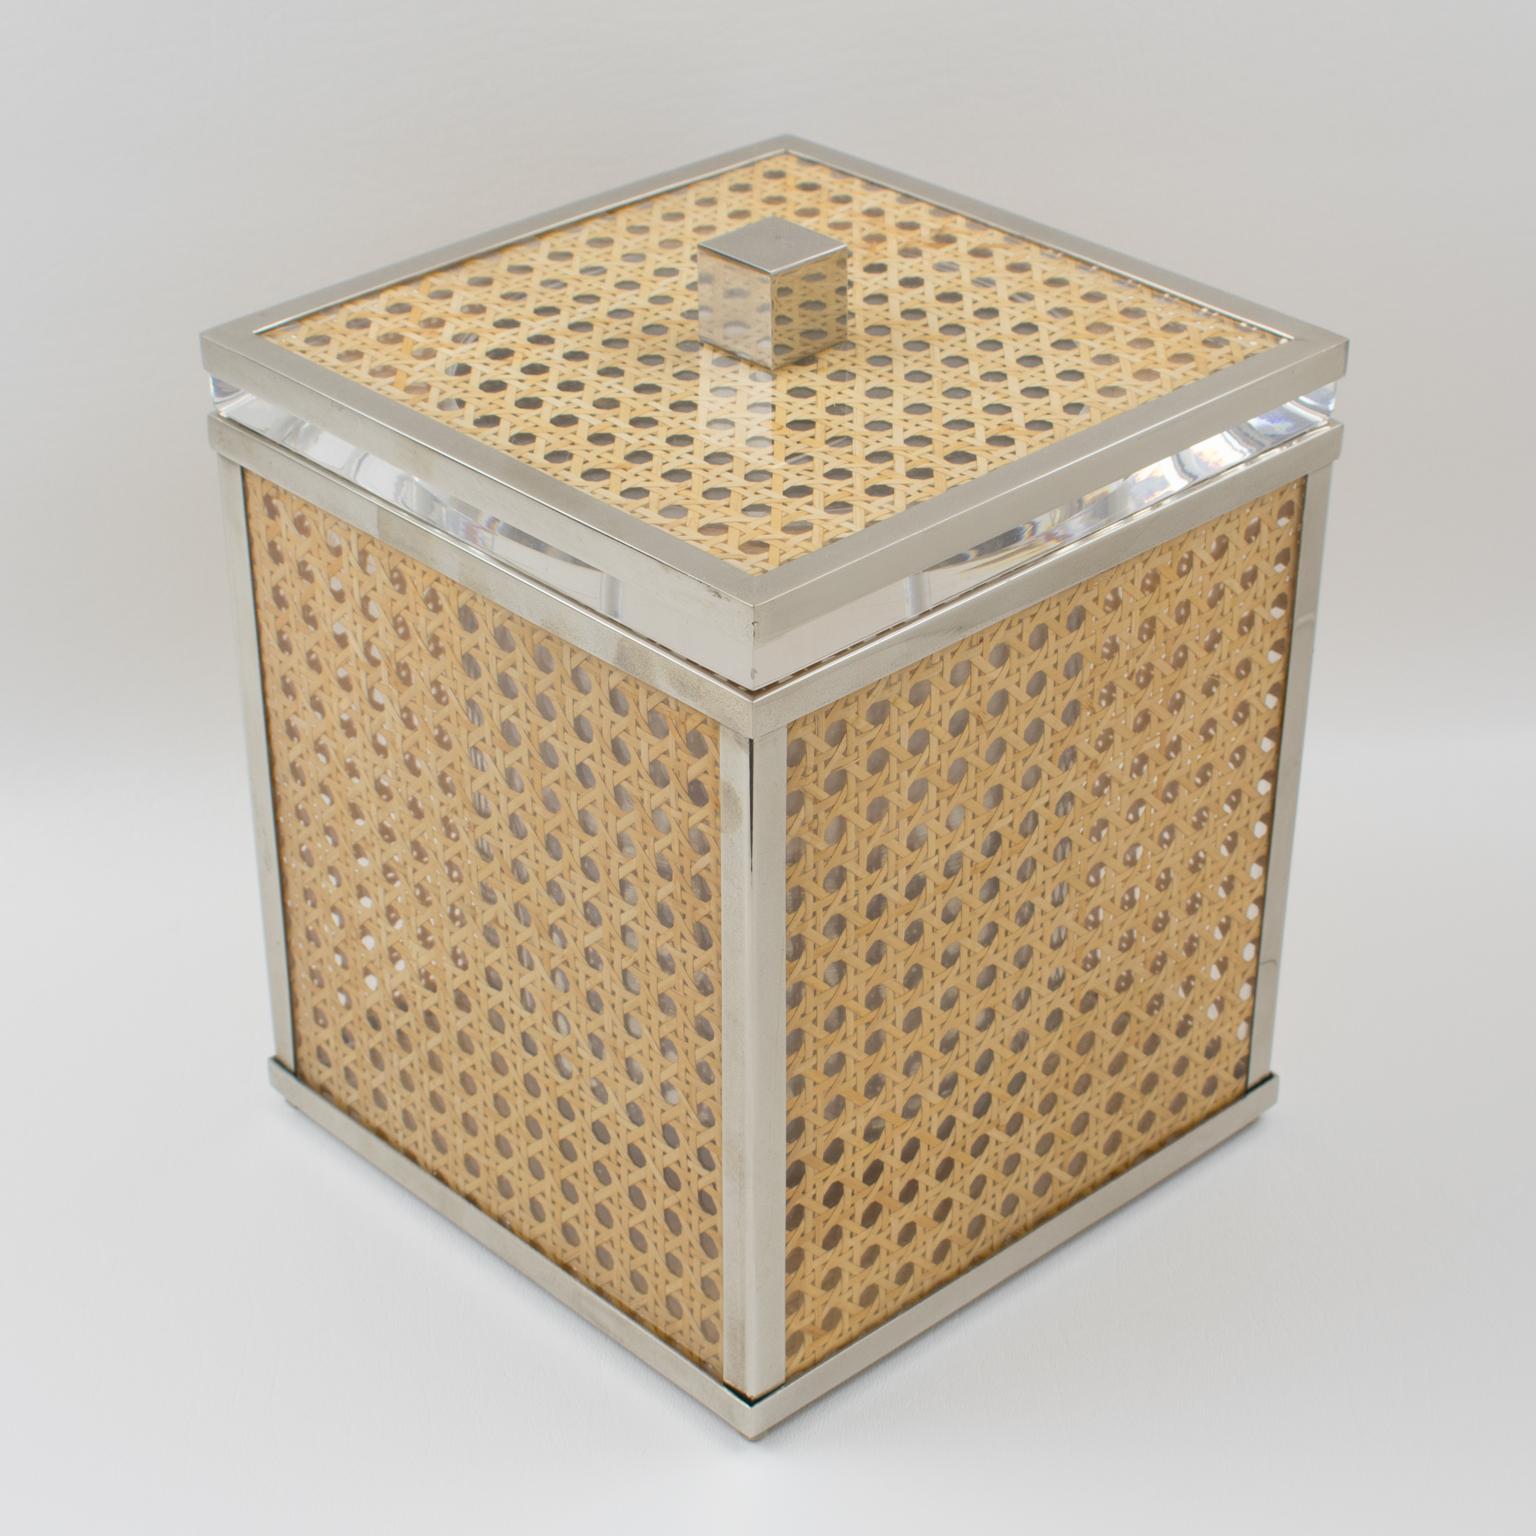 Elegant piece for a bar or cocktail party. Chrome plated metal framing with crystal clear Lucite and rattan cane work. The rattan is imbedded within two sheets of clear Lucite. Very impressive quality serving ice bucket. Aluminum insert. No visible